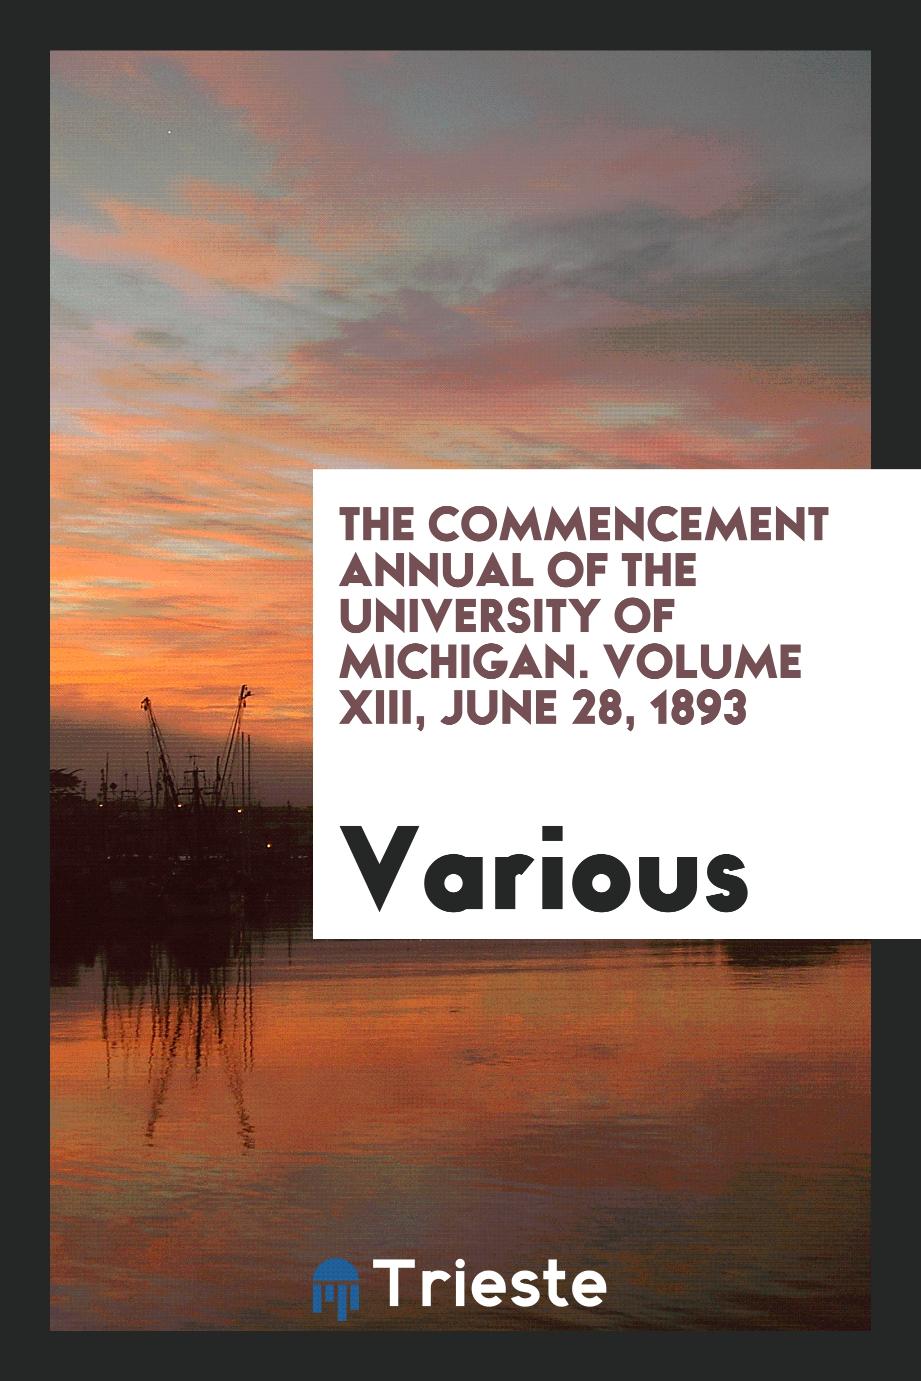 The Commencement Annual of the University of Michigan. Volume XIII, June 28, 1893